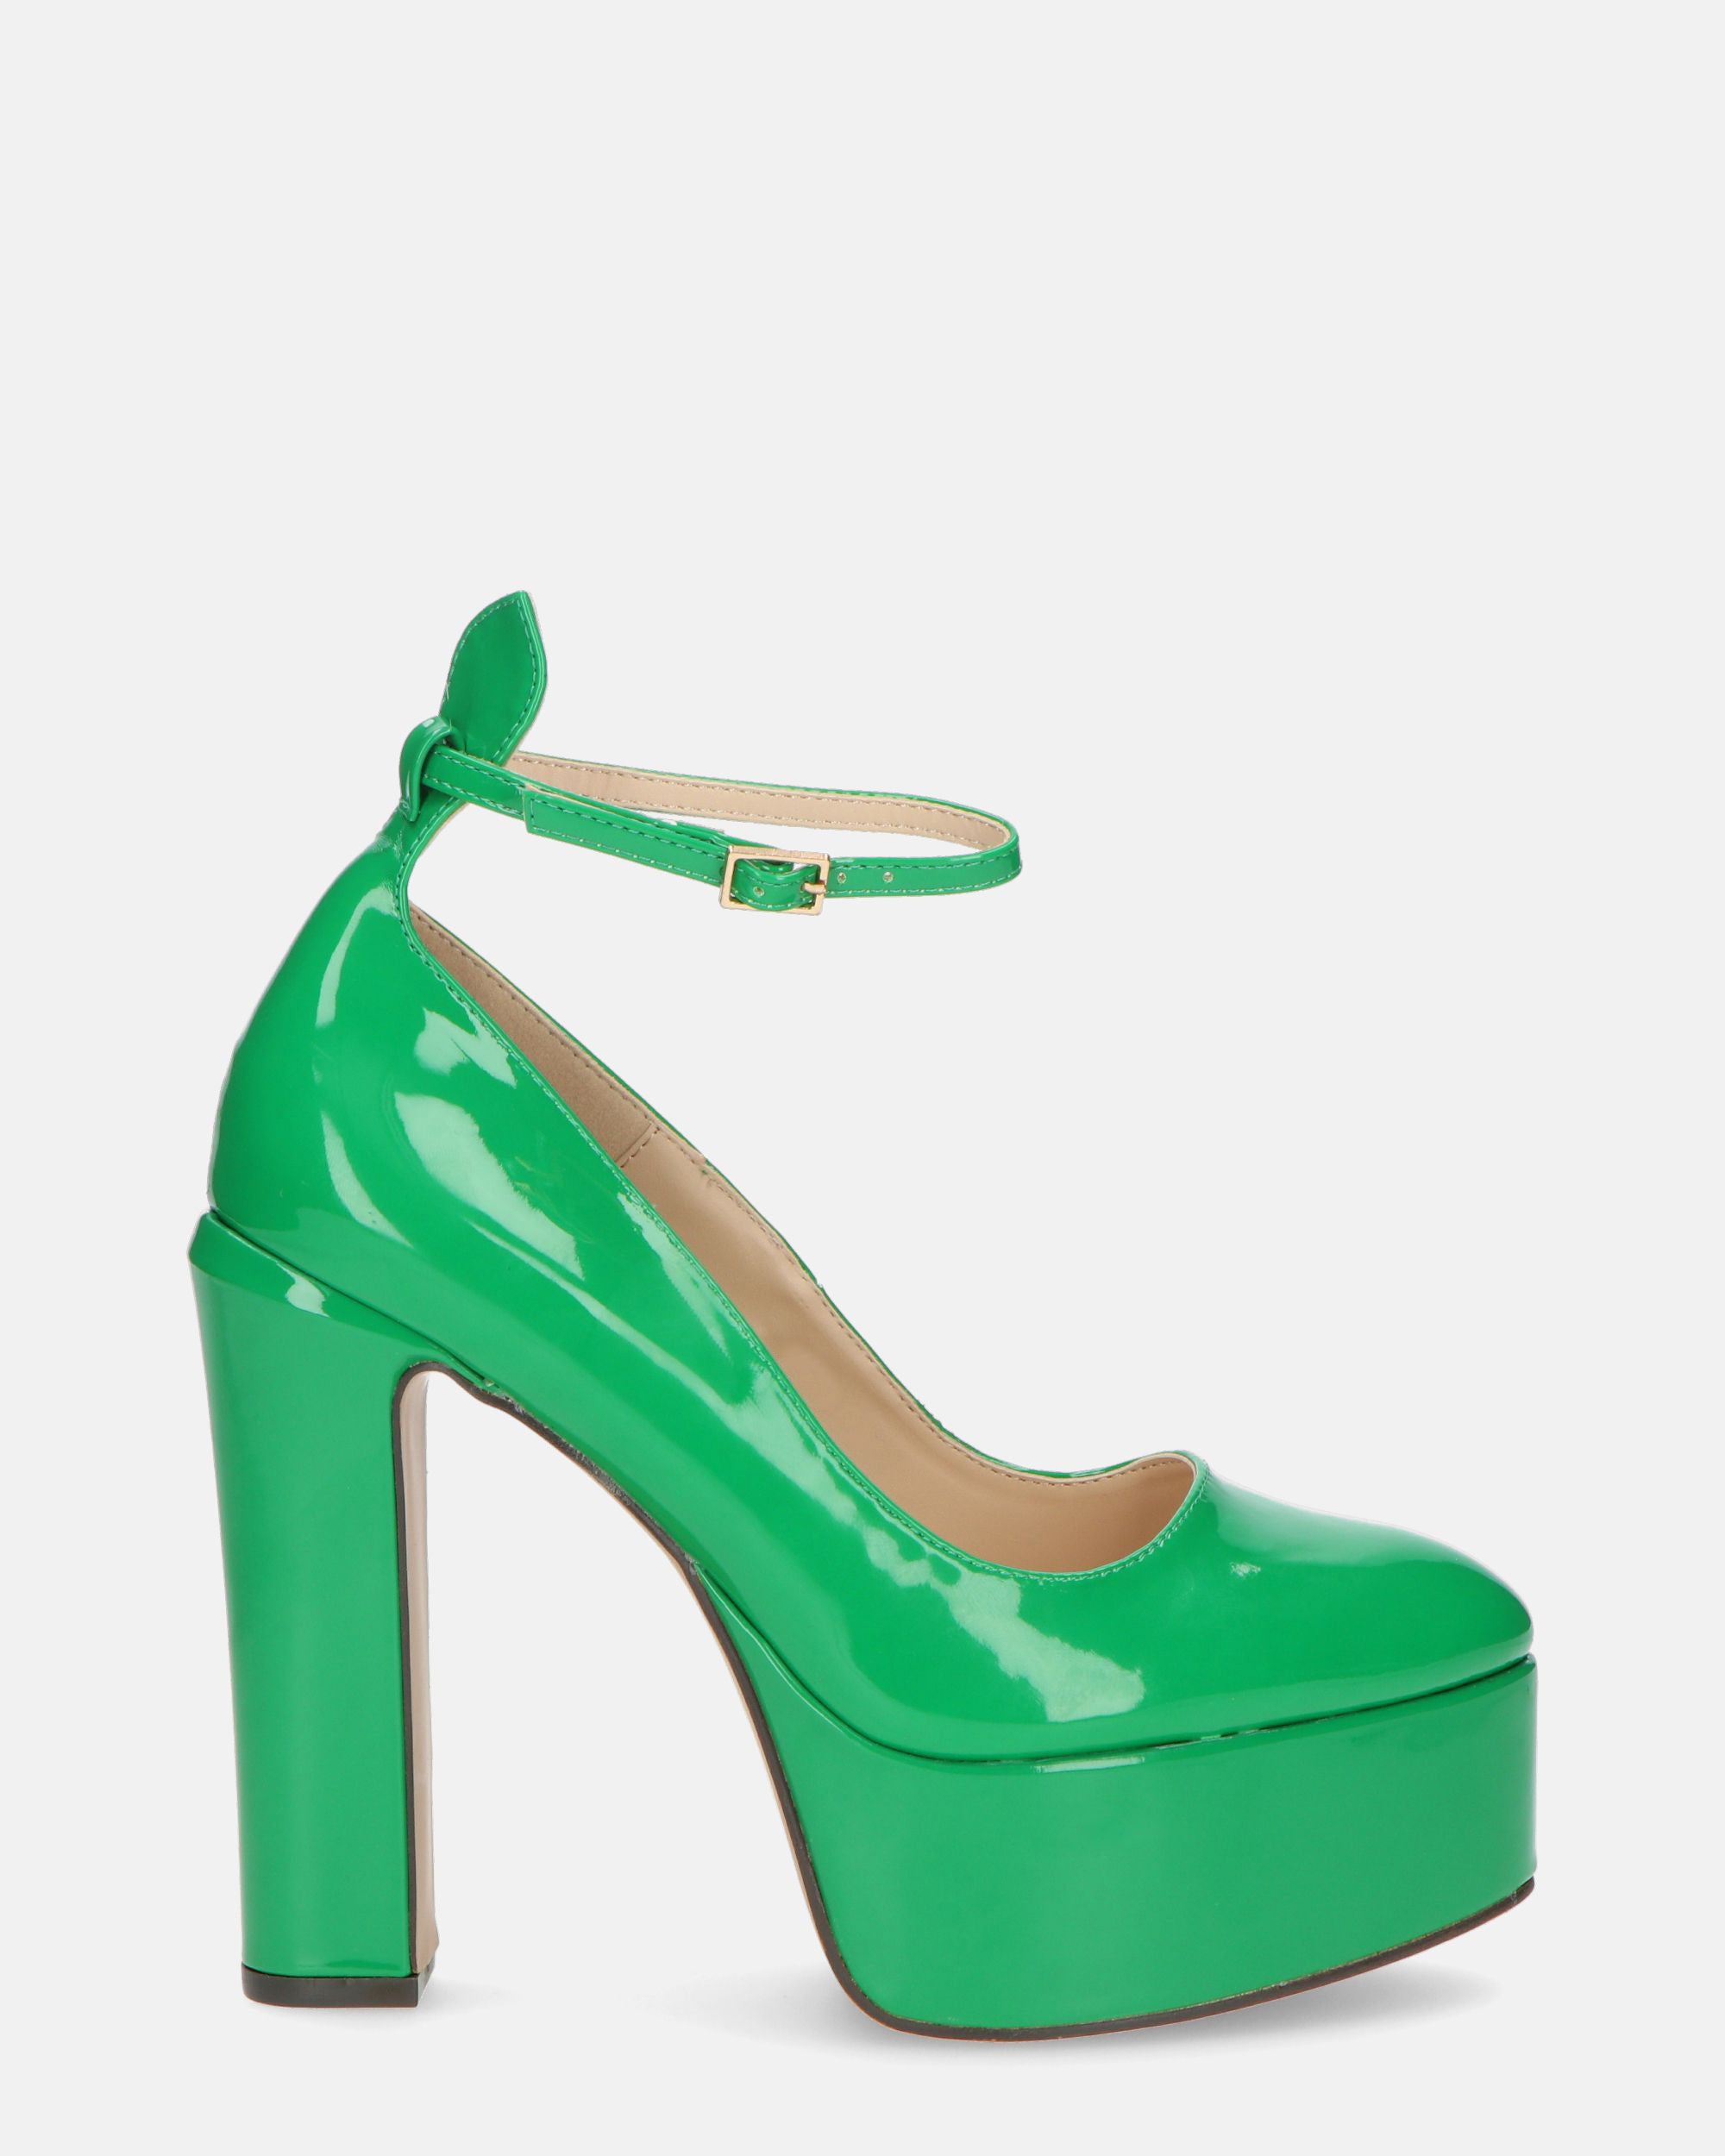 SOLEIL - high-heeled shoes in green glassy